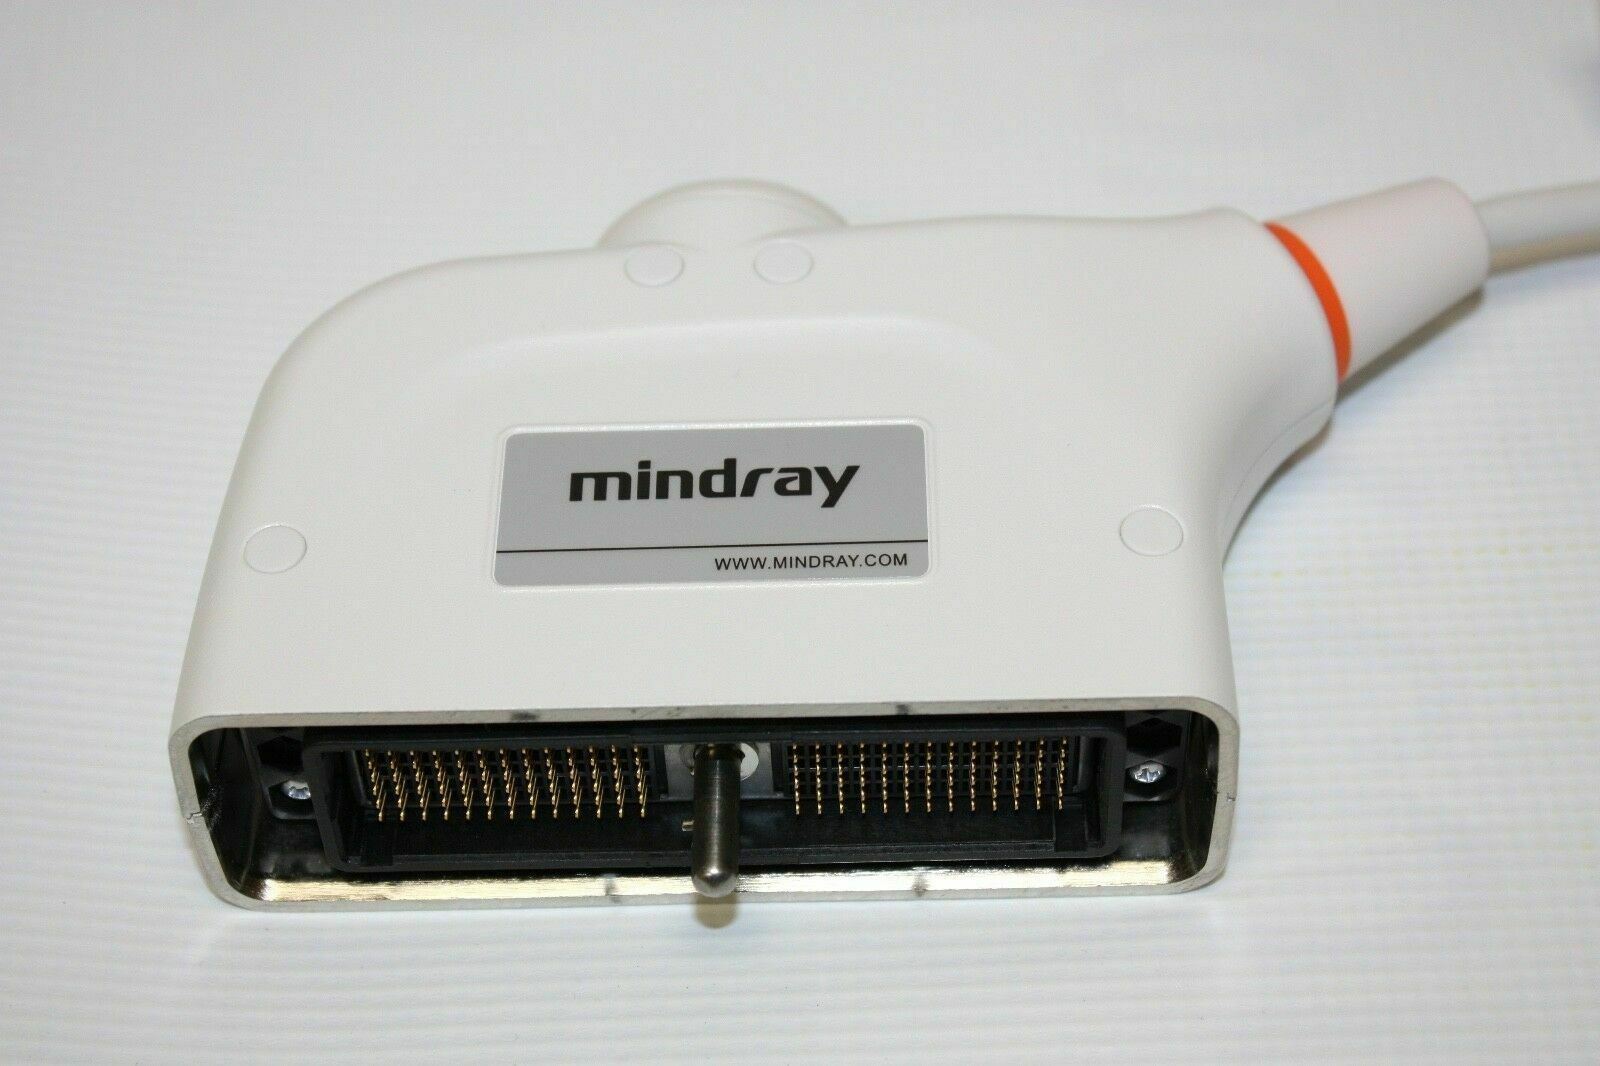 Genuine Mindray 6C2P Micro-Convex Probe, FOR Z6, Z6 Vet, DP-7 Ultrasounds DIAGNOSTIC ULTRASOUND MACHINES FOR SALE